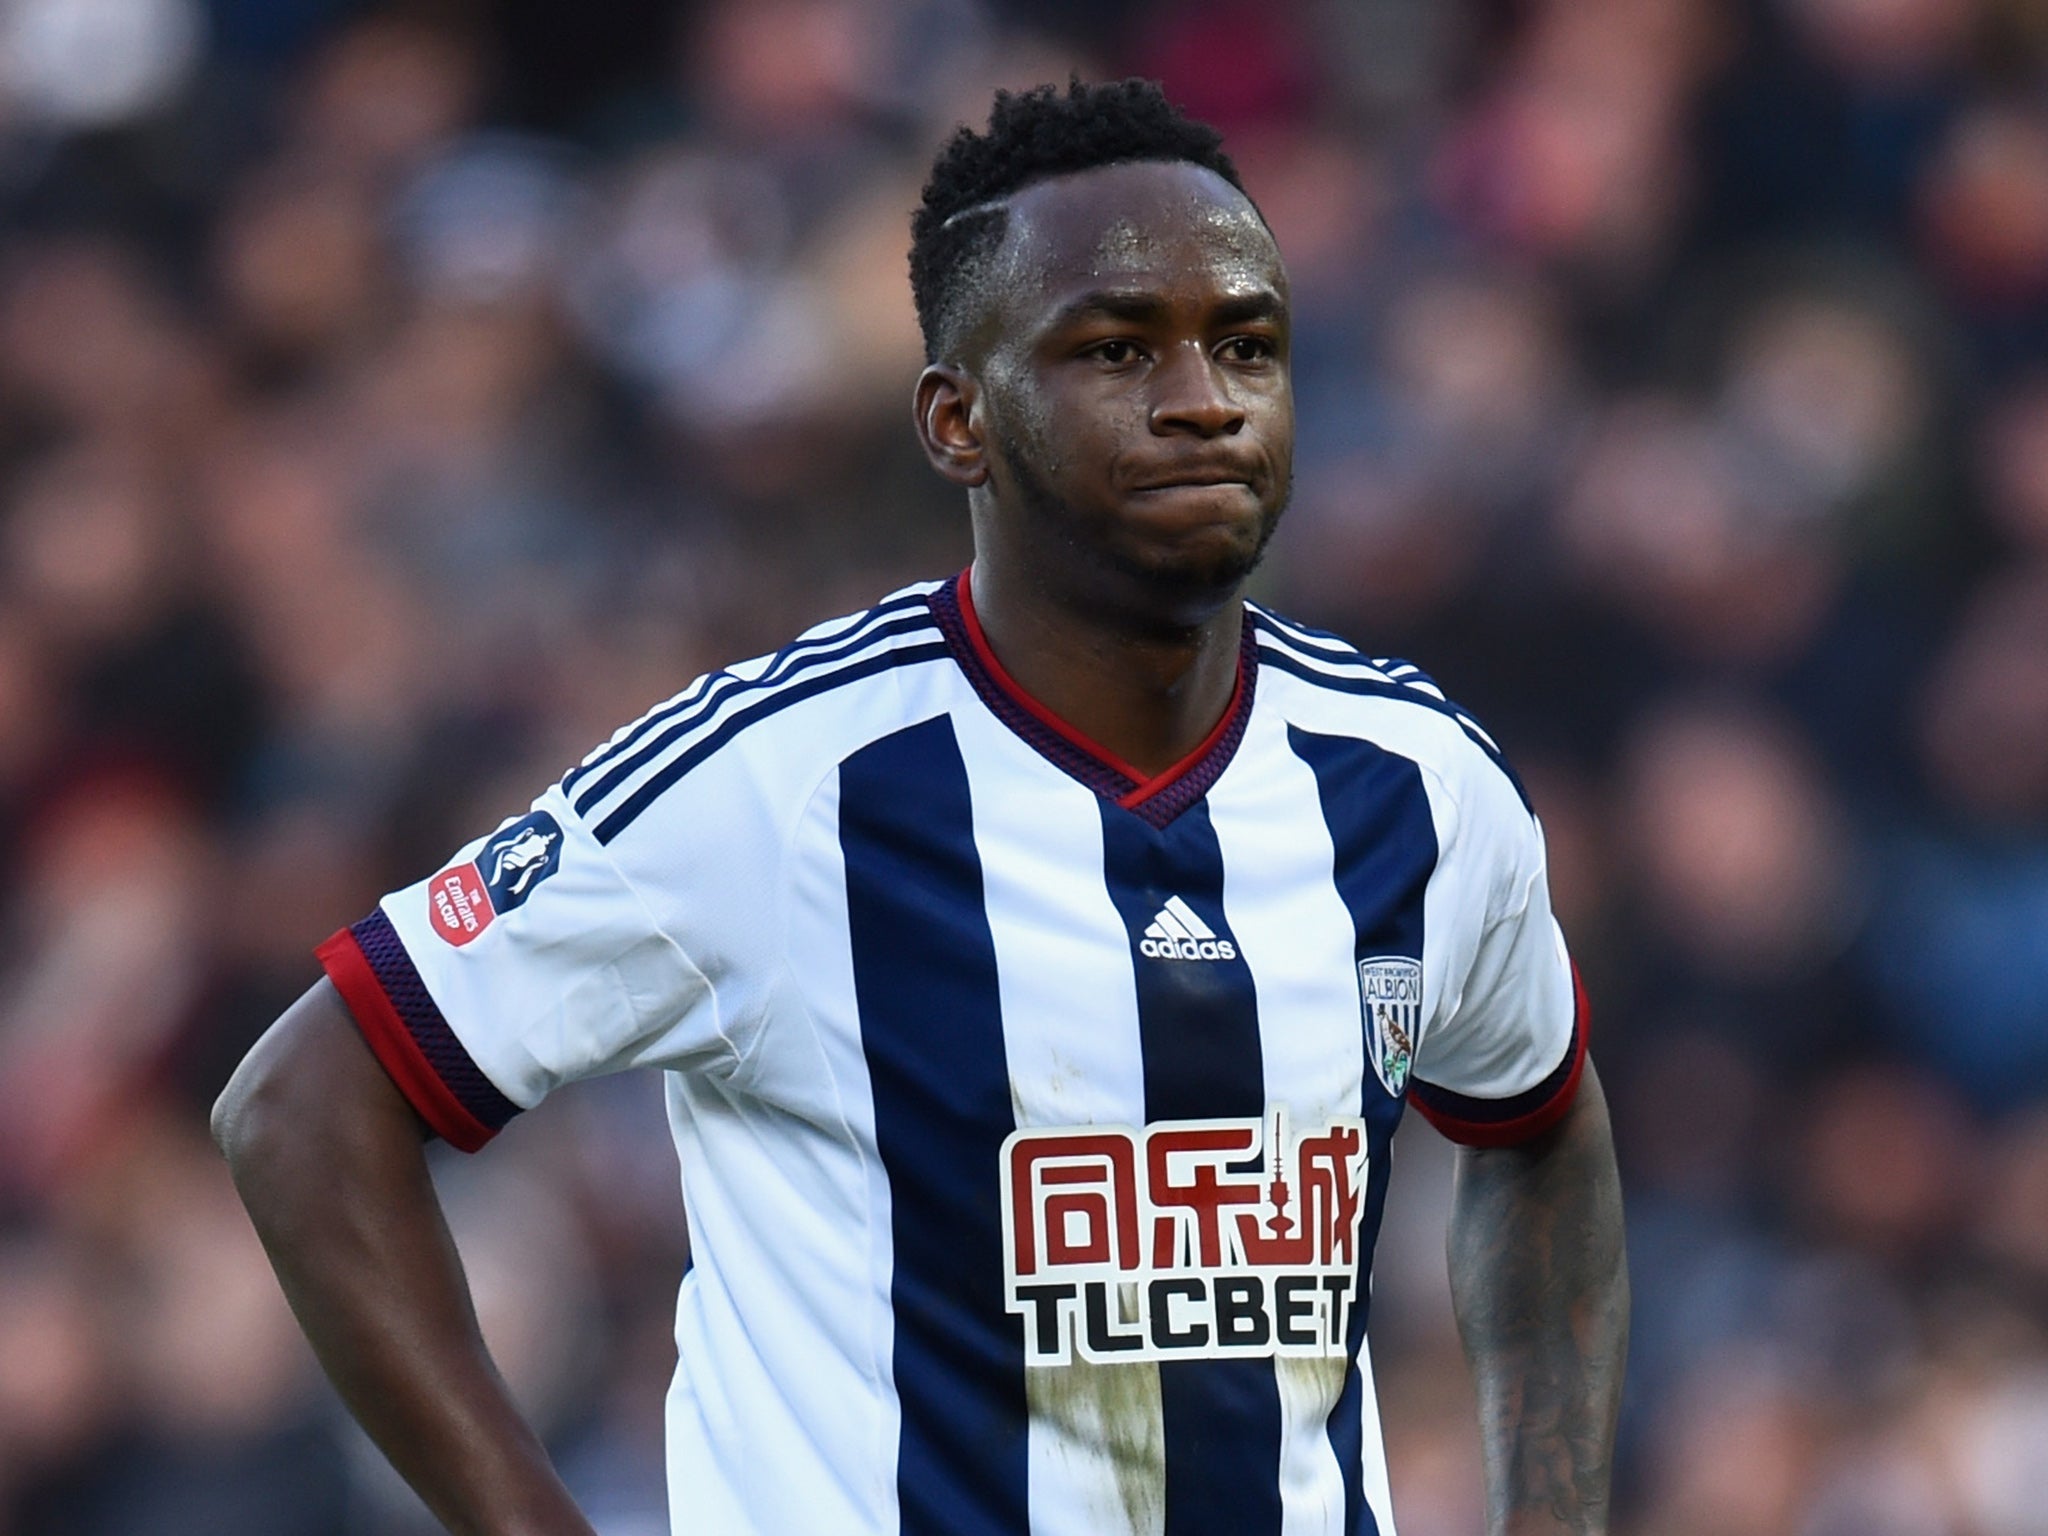 Saido Berahino's attitude has not impressed West Bromwich supporters this season